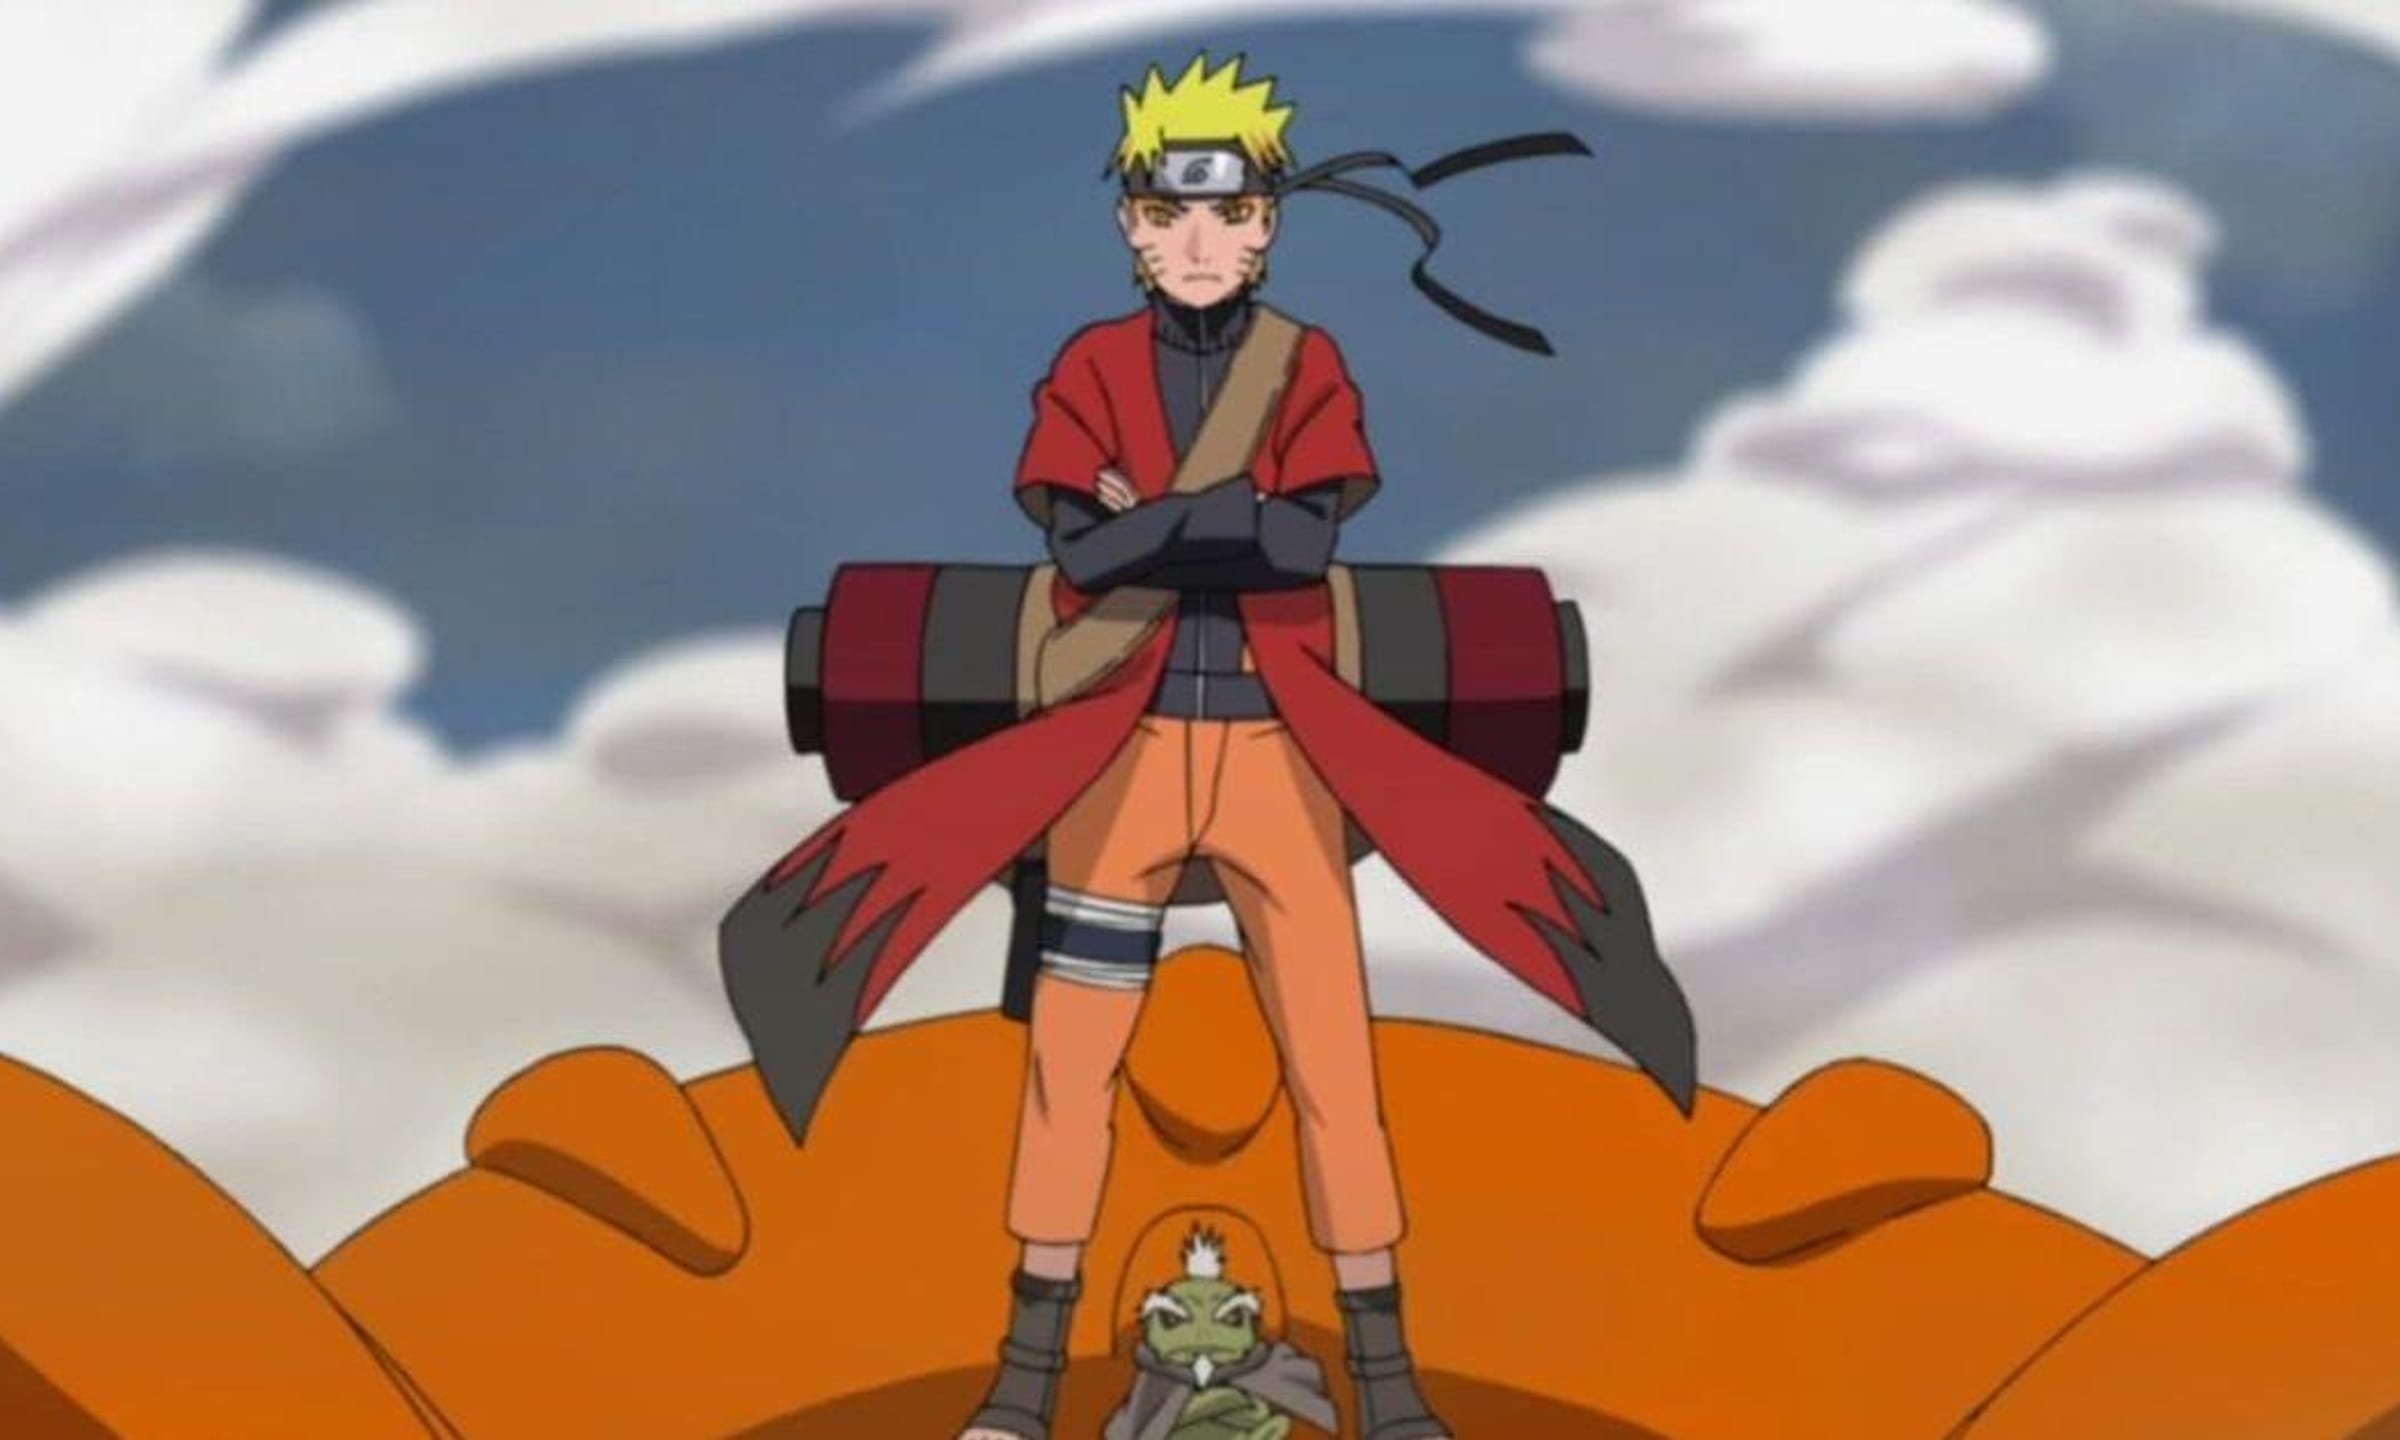 HEIGHTS OF ALL CLASSIC NARUTO CHARACTERS - COMPARISON OF THE